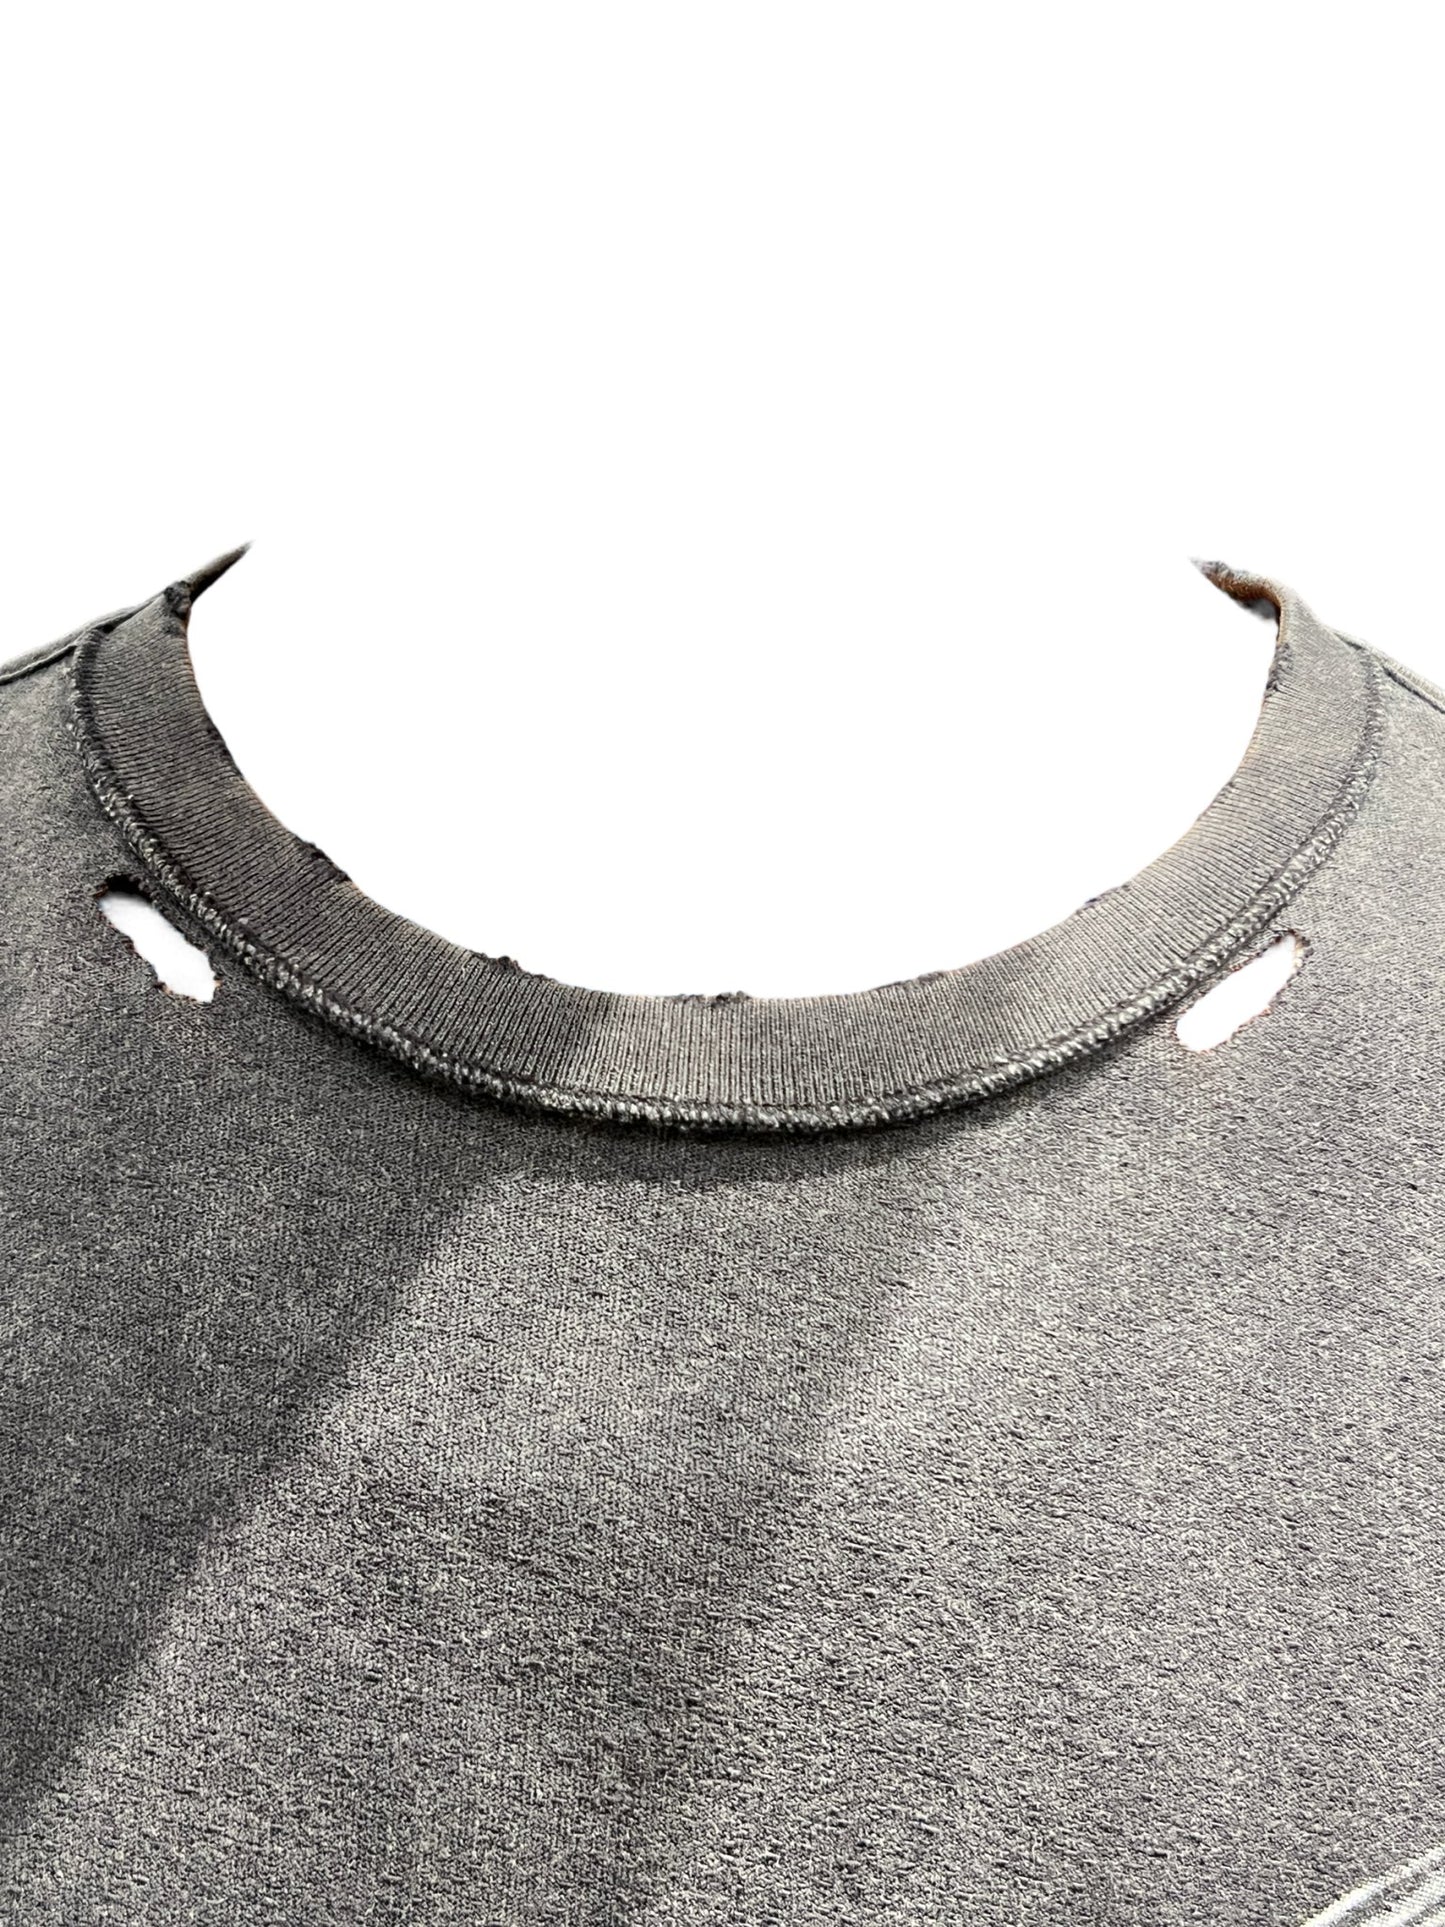 A black textured inside out tee by PURPLE BRAND with a hole in it.